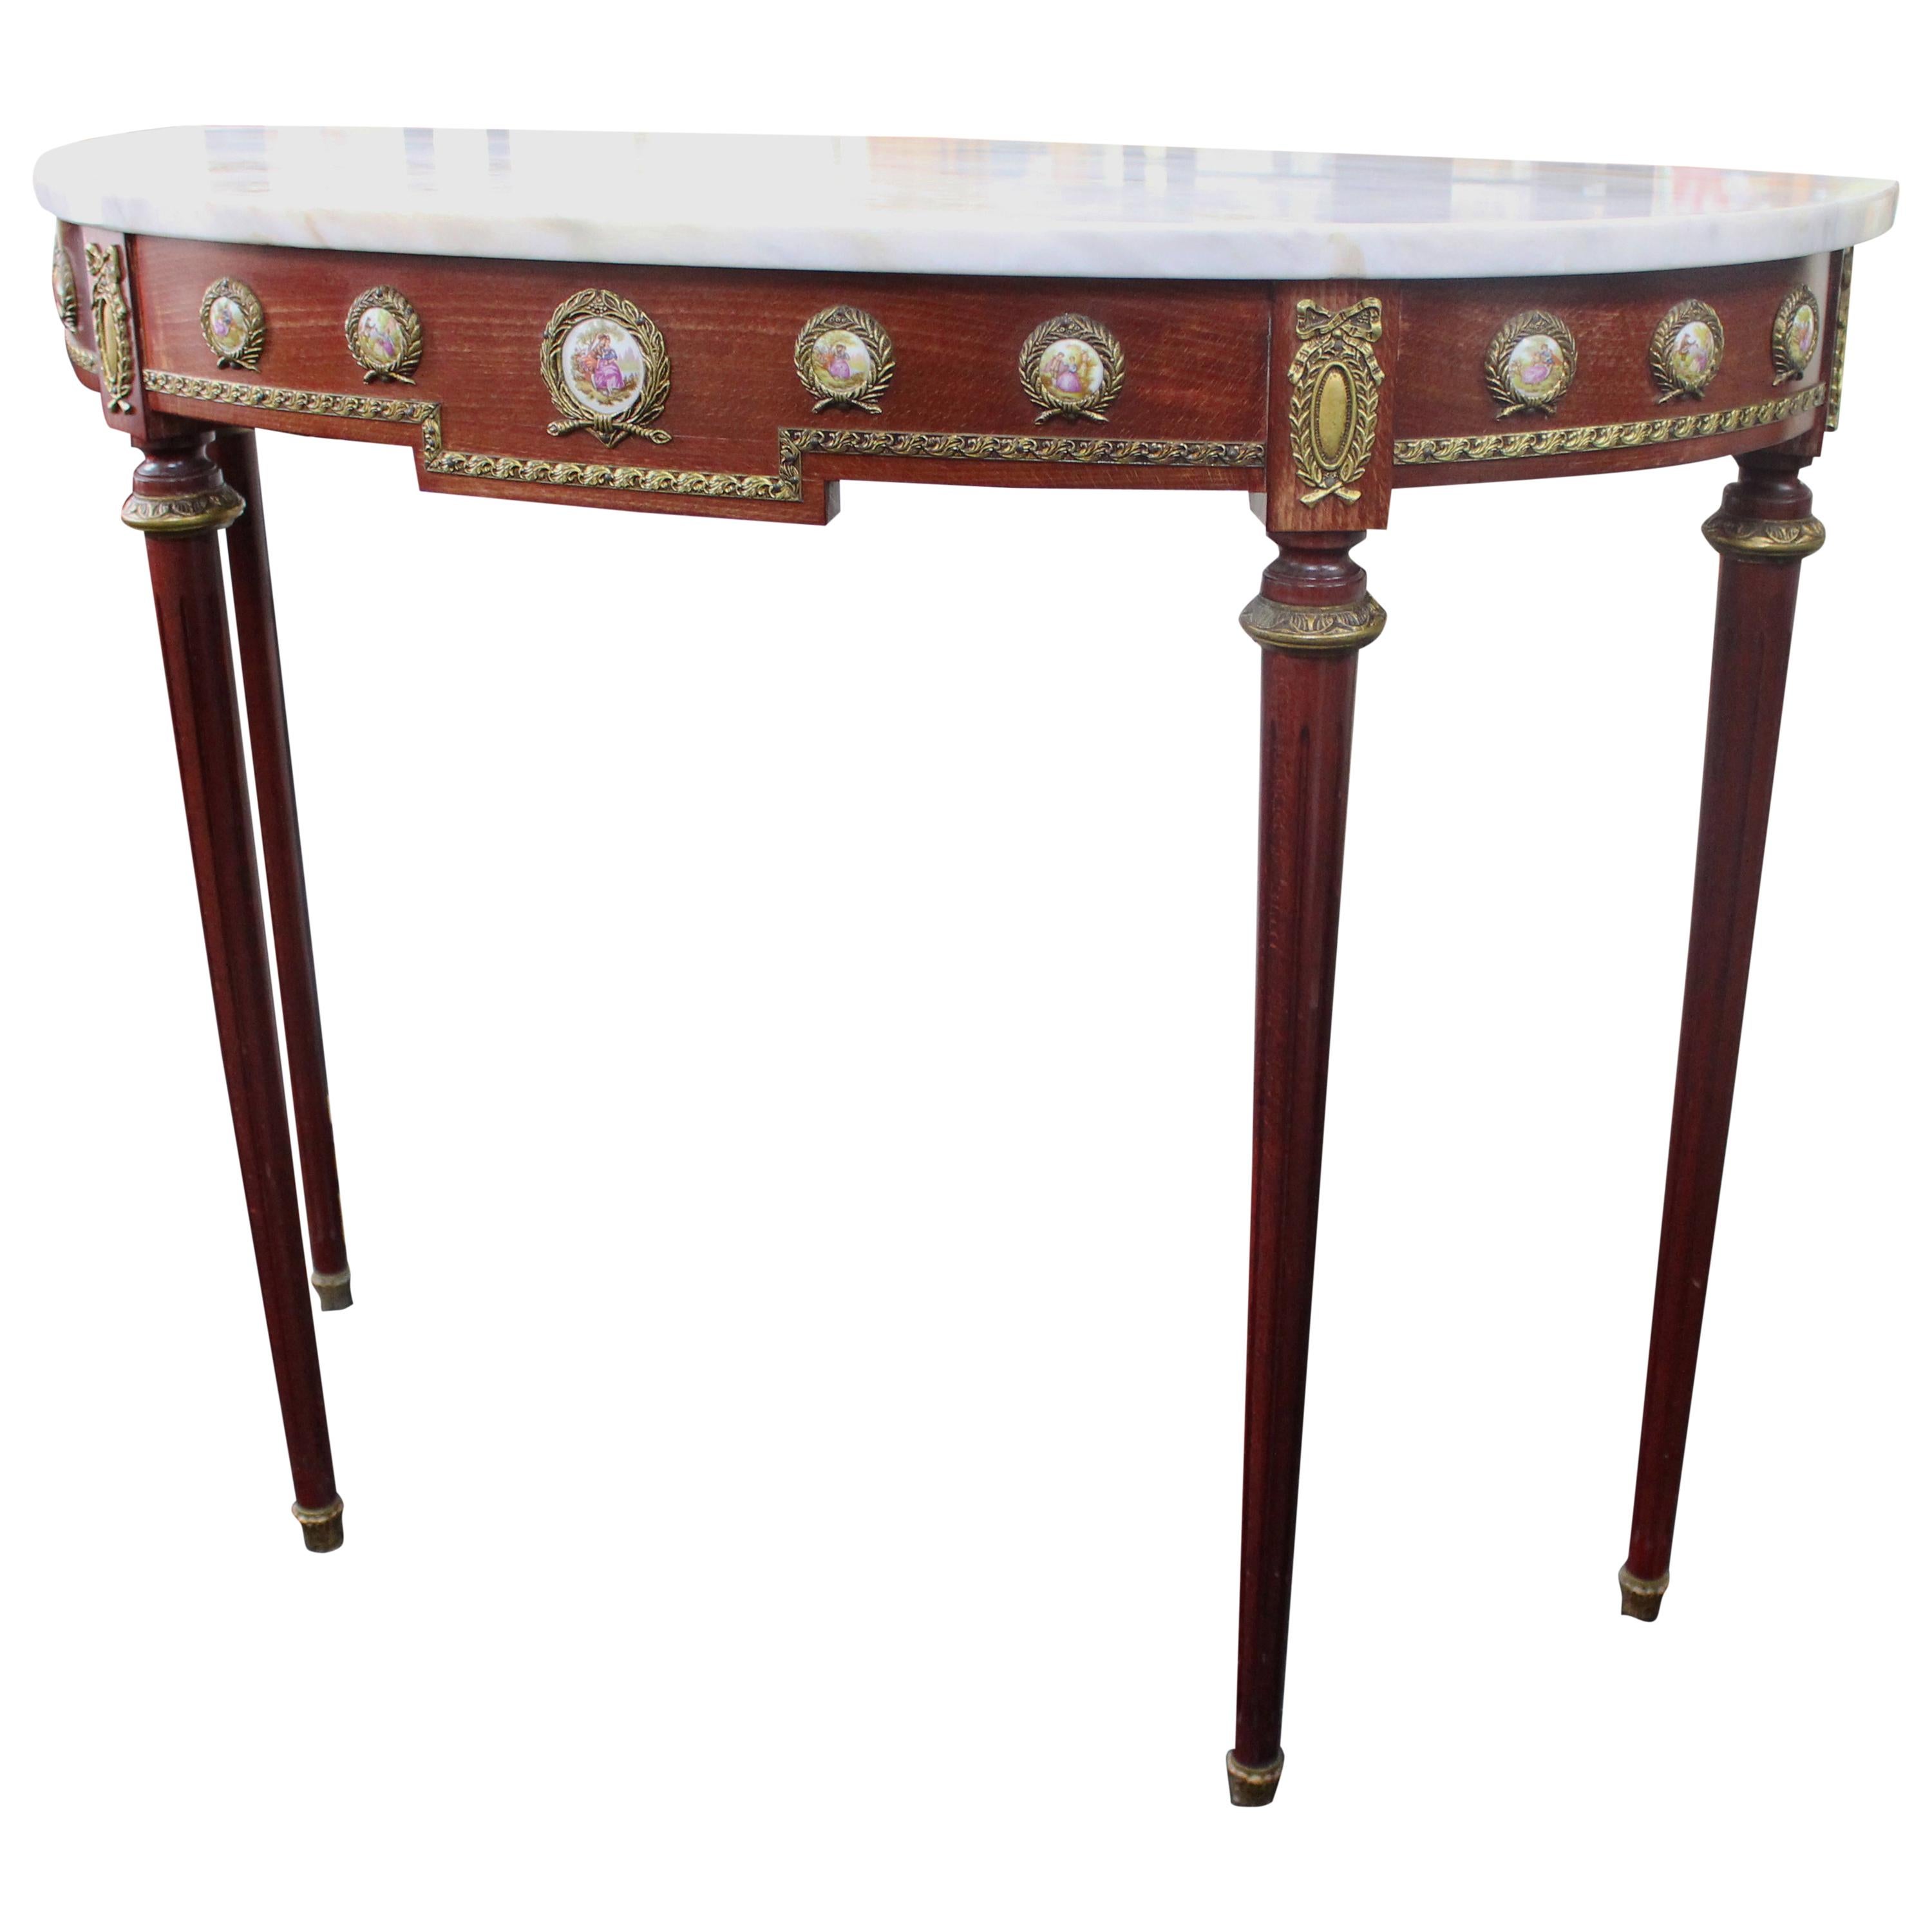 Decorative Marble-Topped Side Table with Porcelain Panels